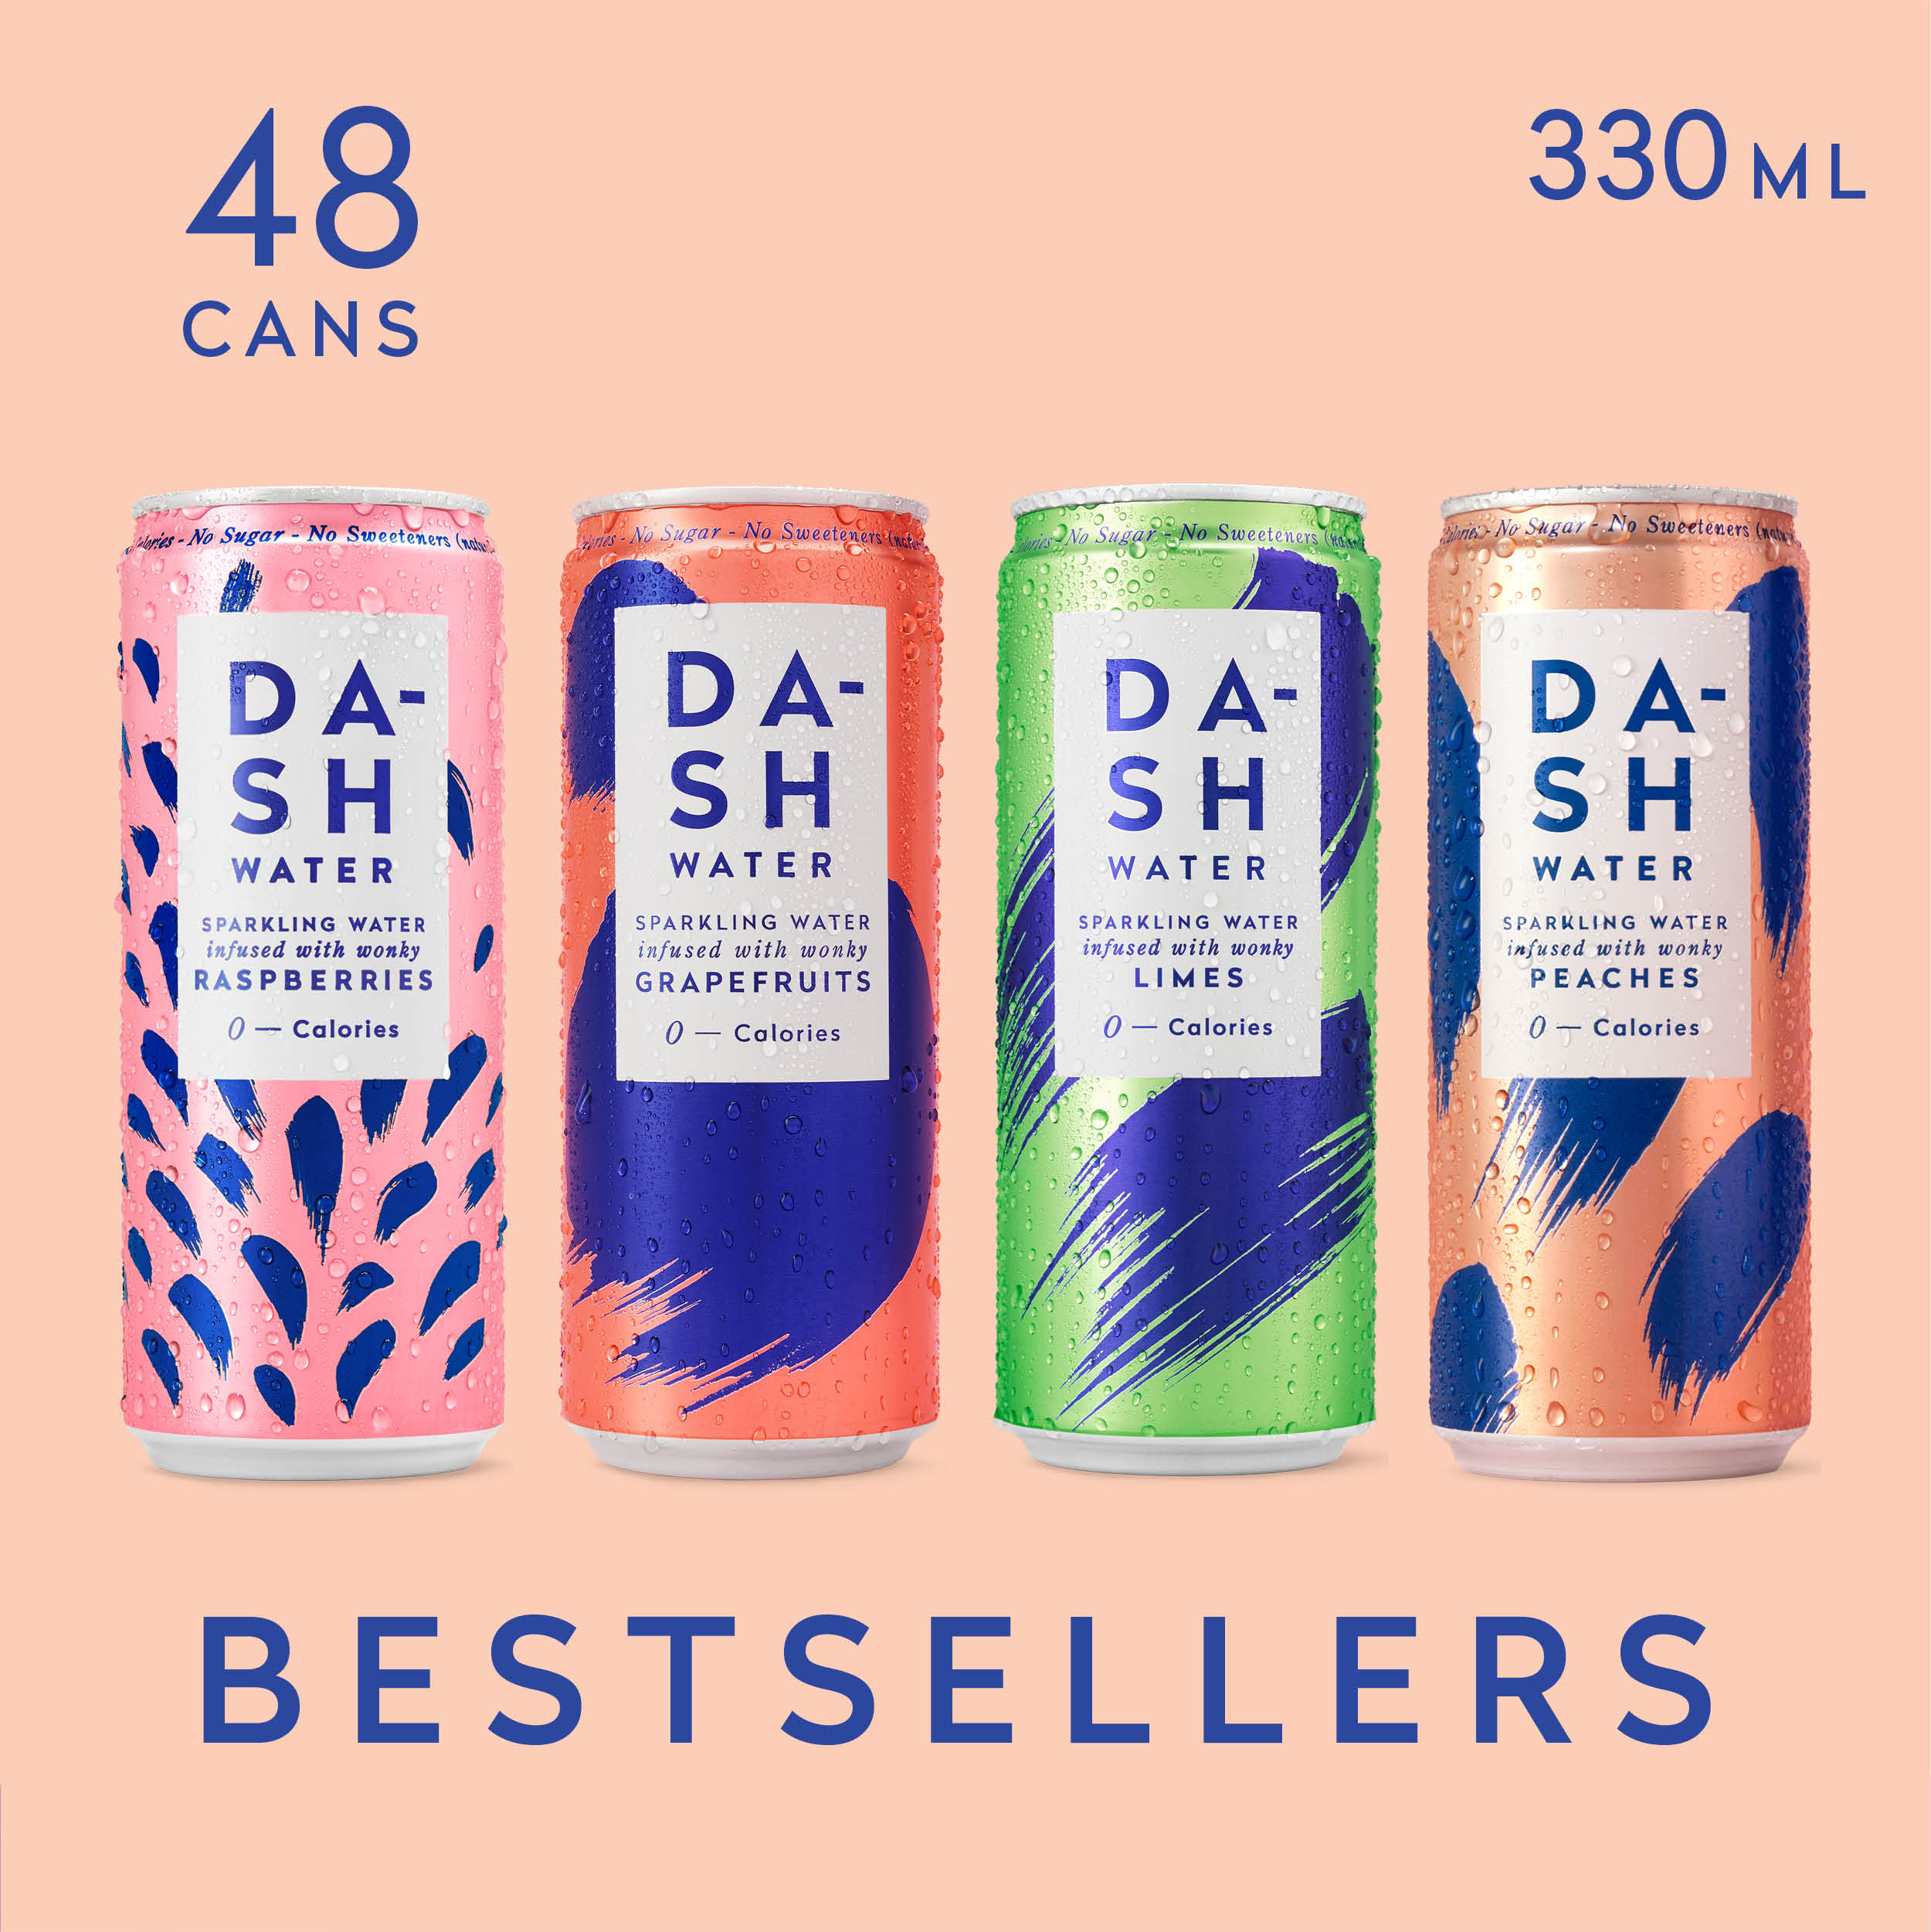 Bestsellers, 48 Cans of Infused Sparkling Water